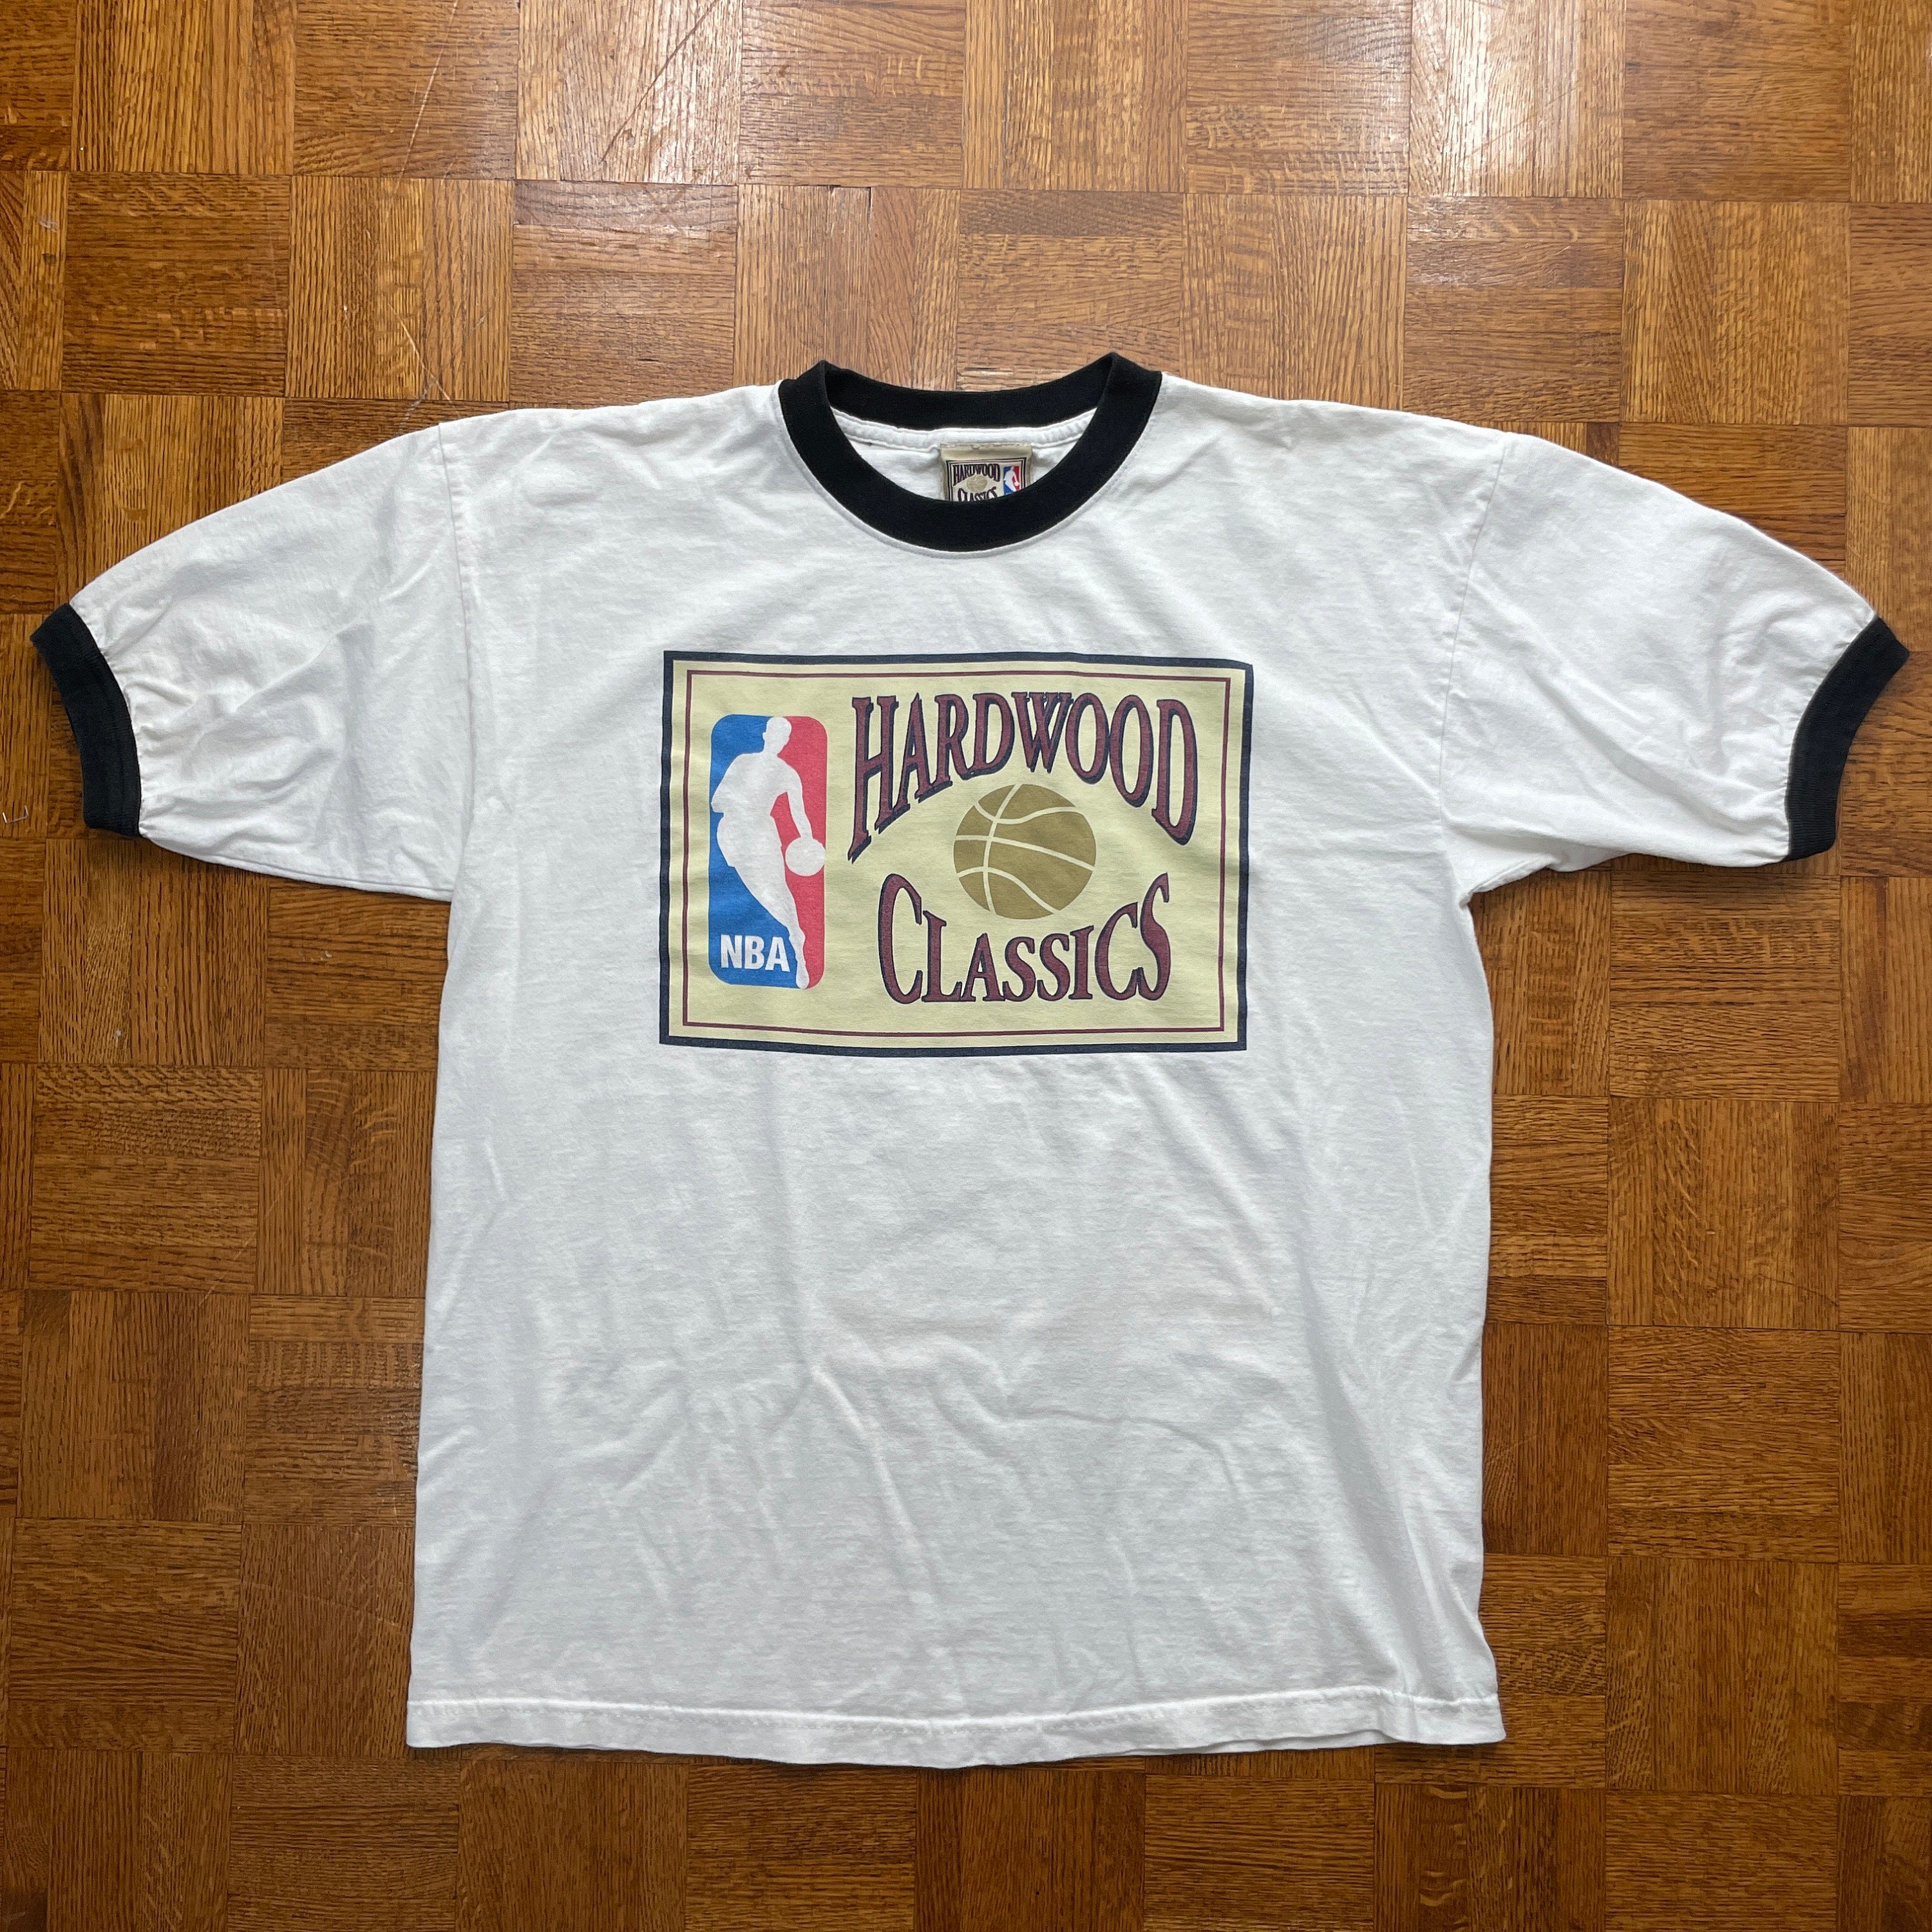 Get great throwback style with the NBA Hardwood Classics Apparel